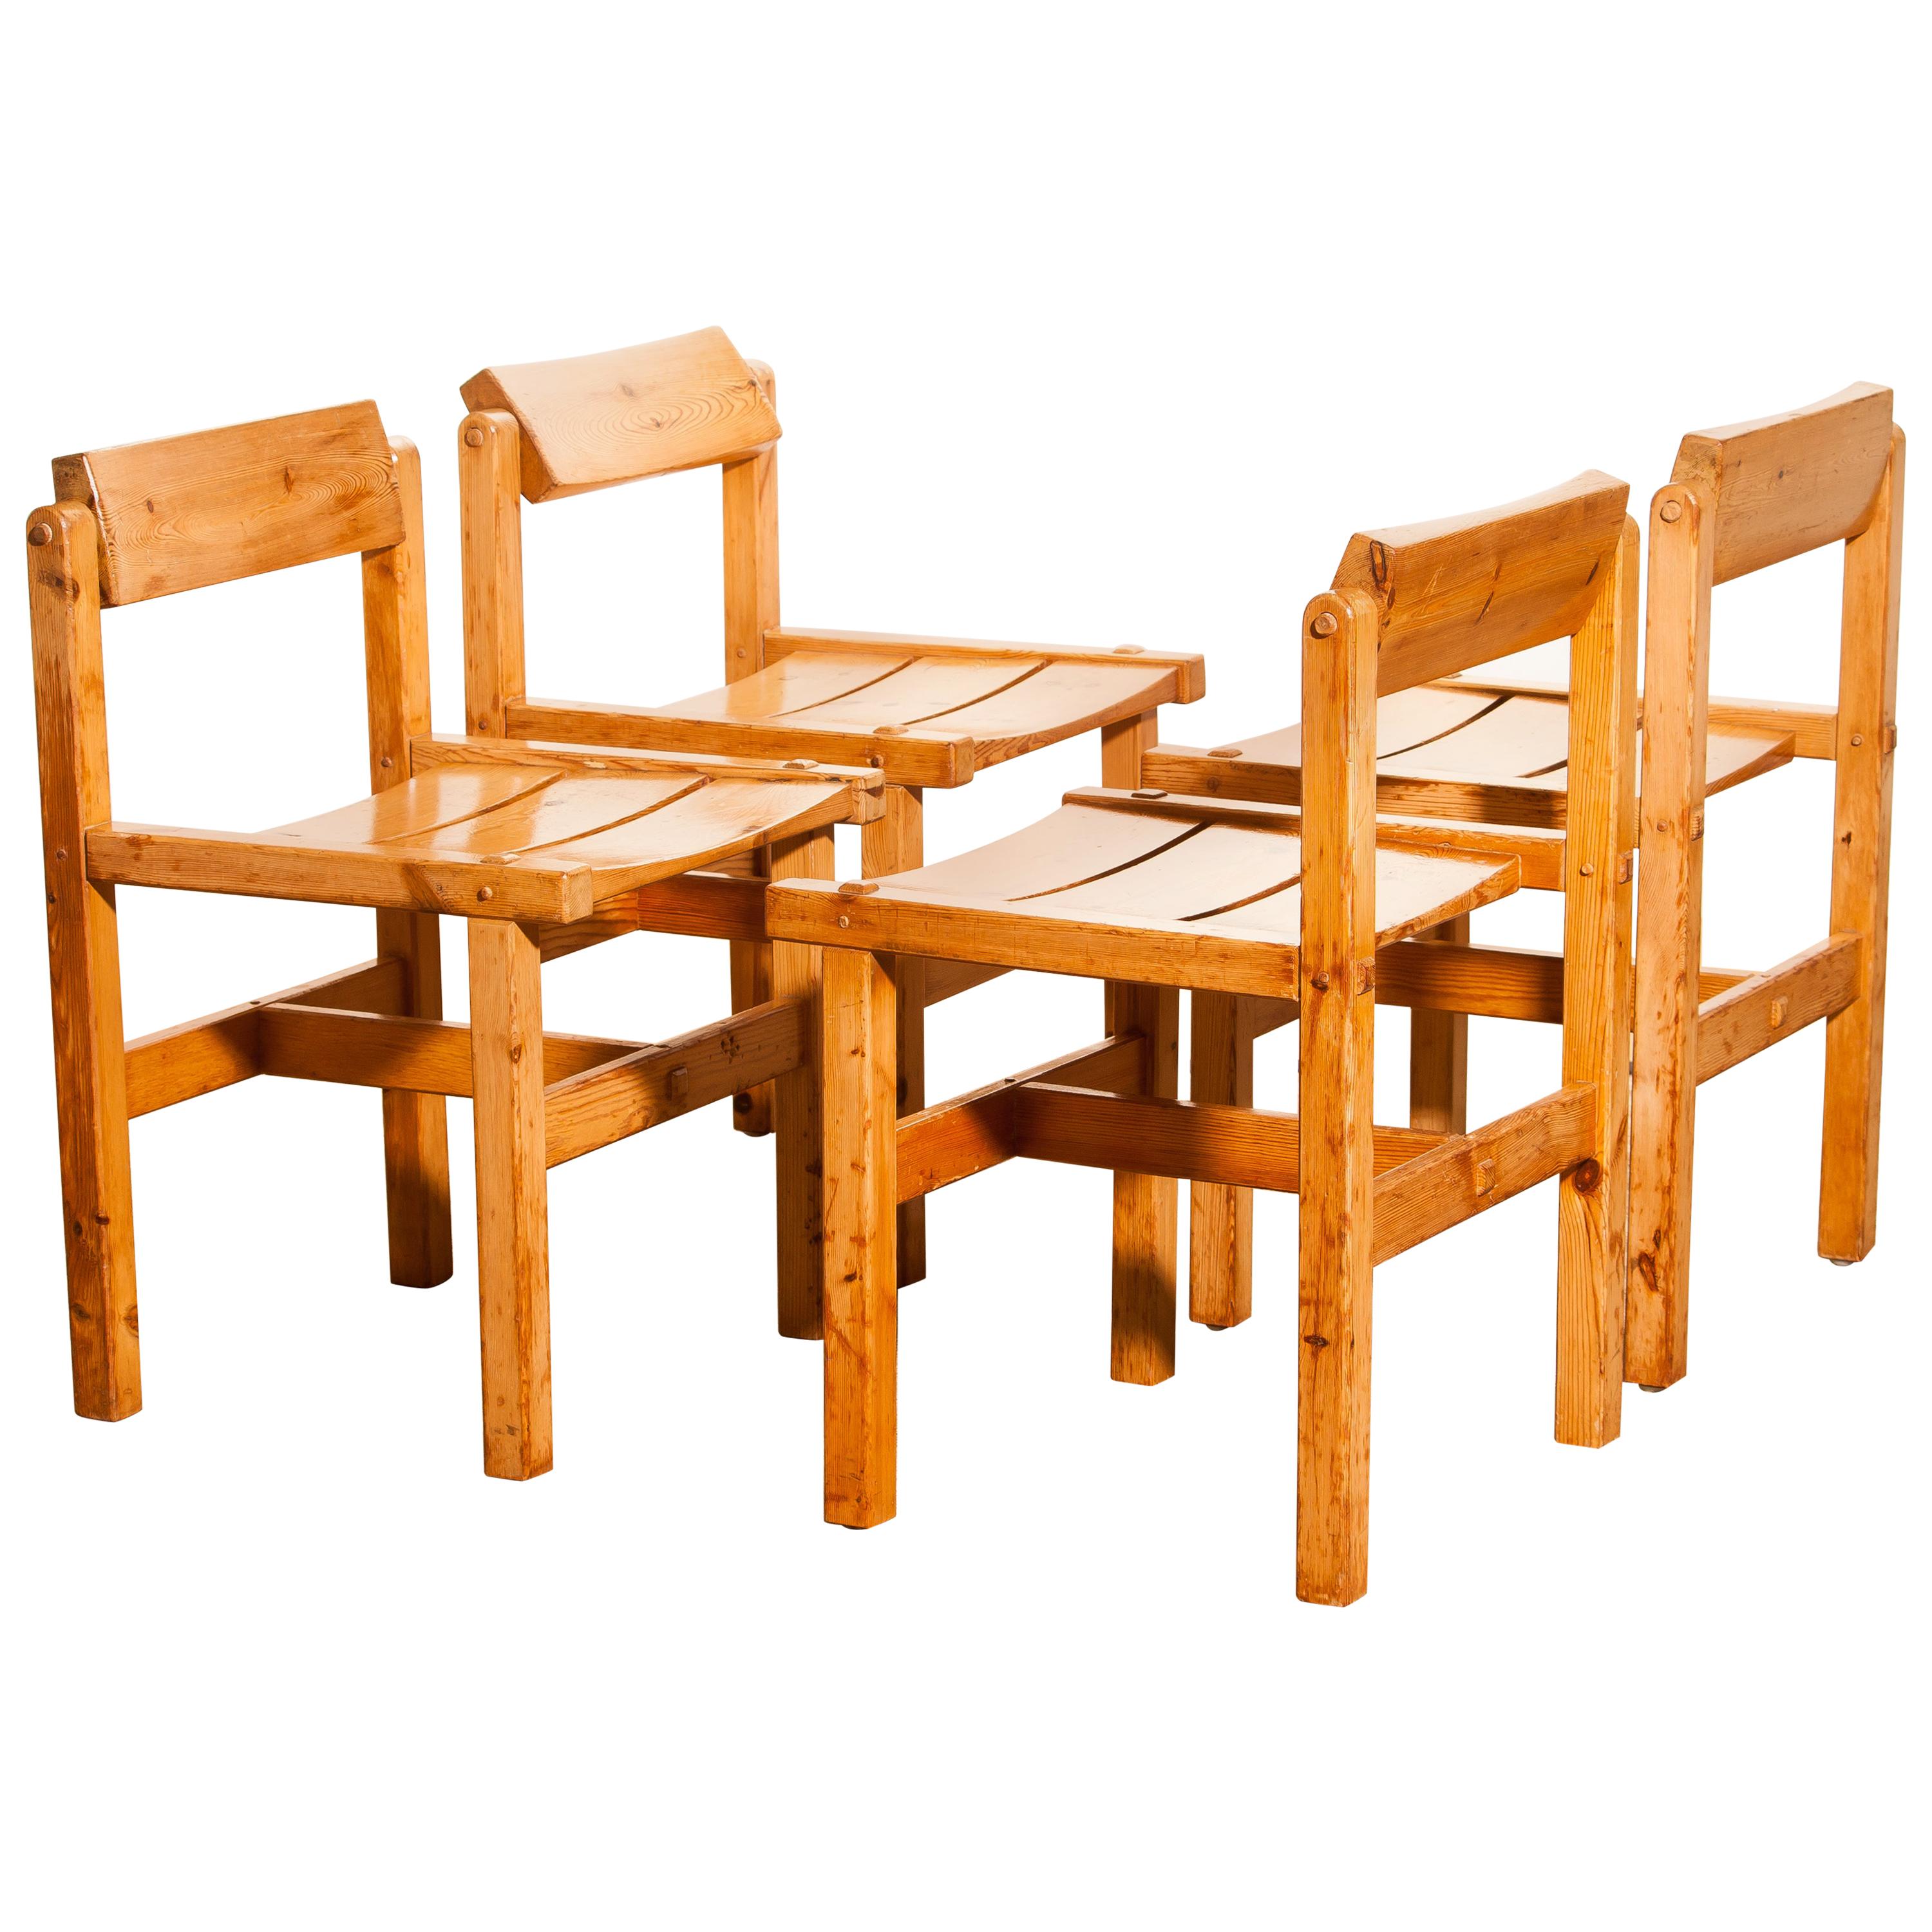 1960s, Set of Four Pine Dining Chairs by Edvin Helseth, Norway